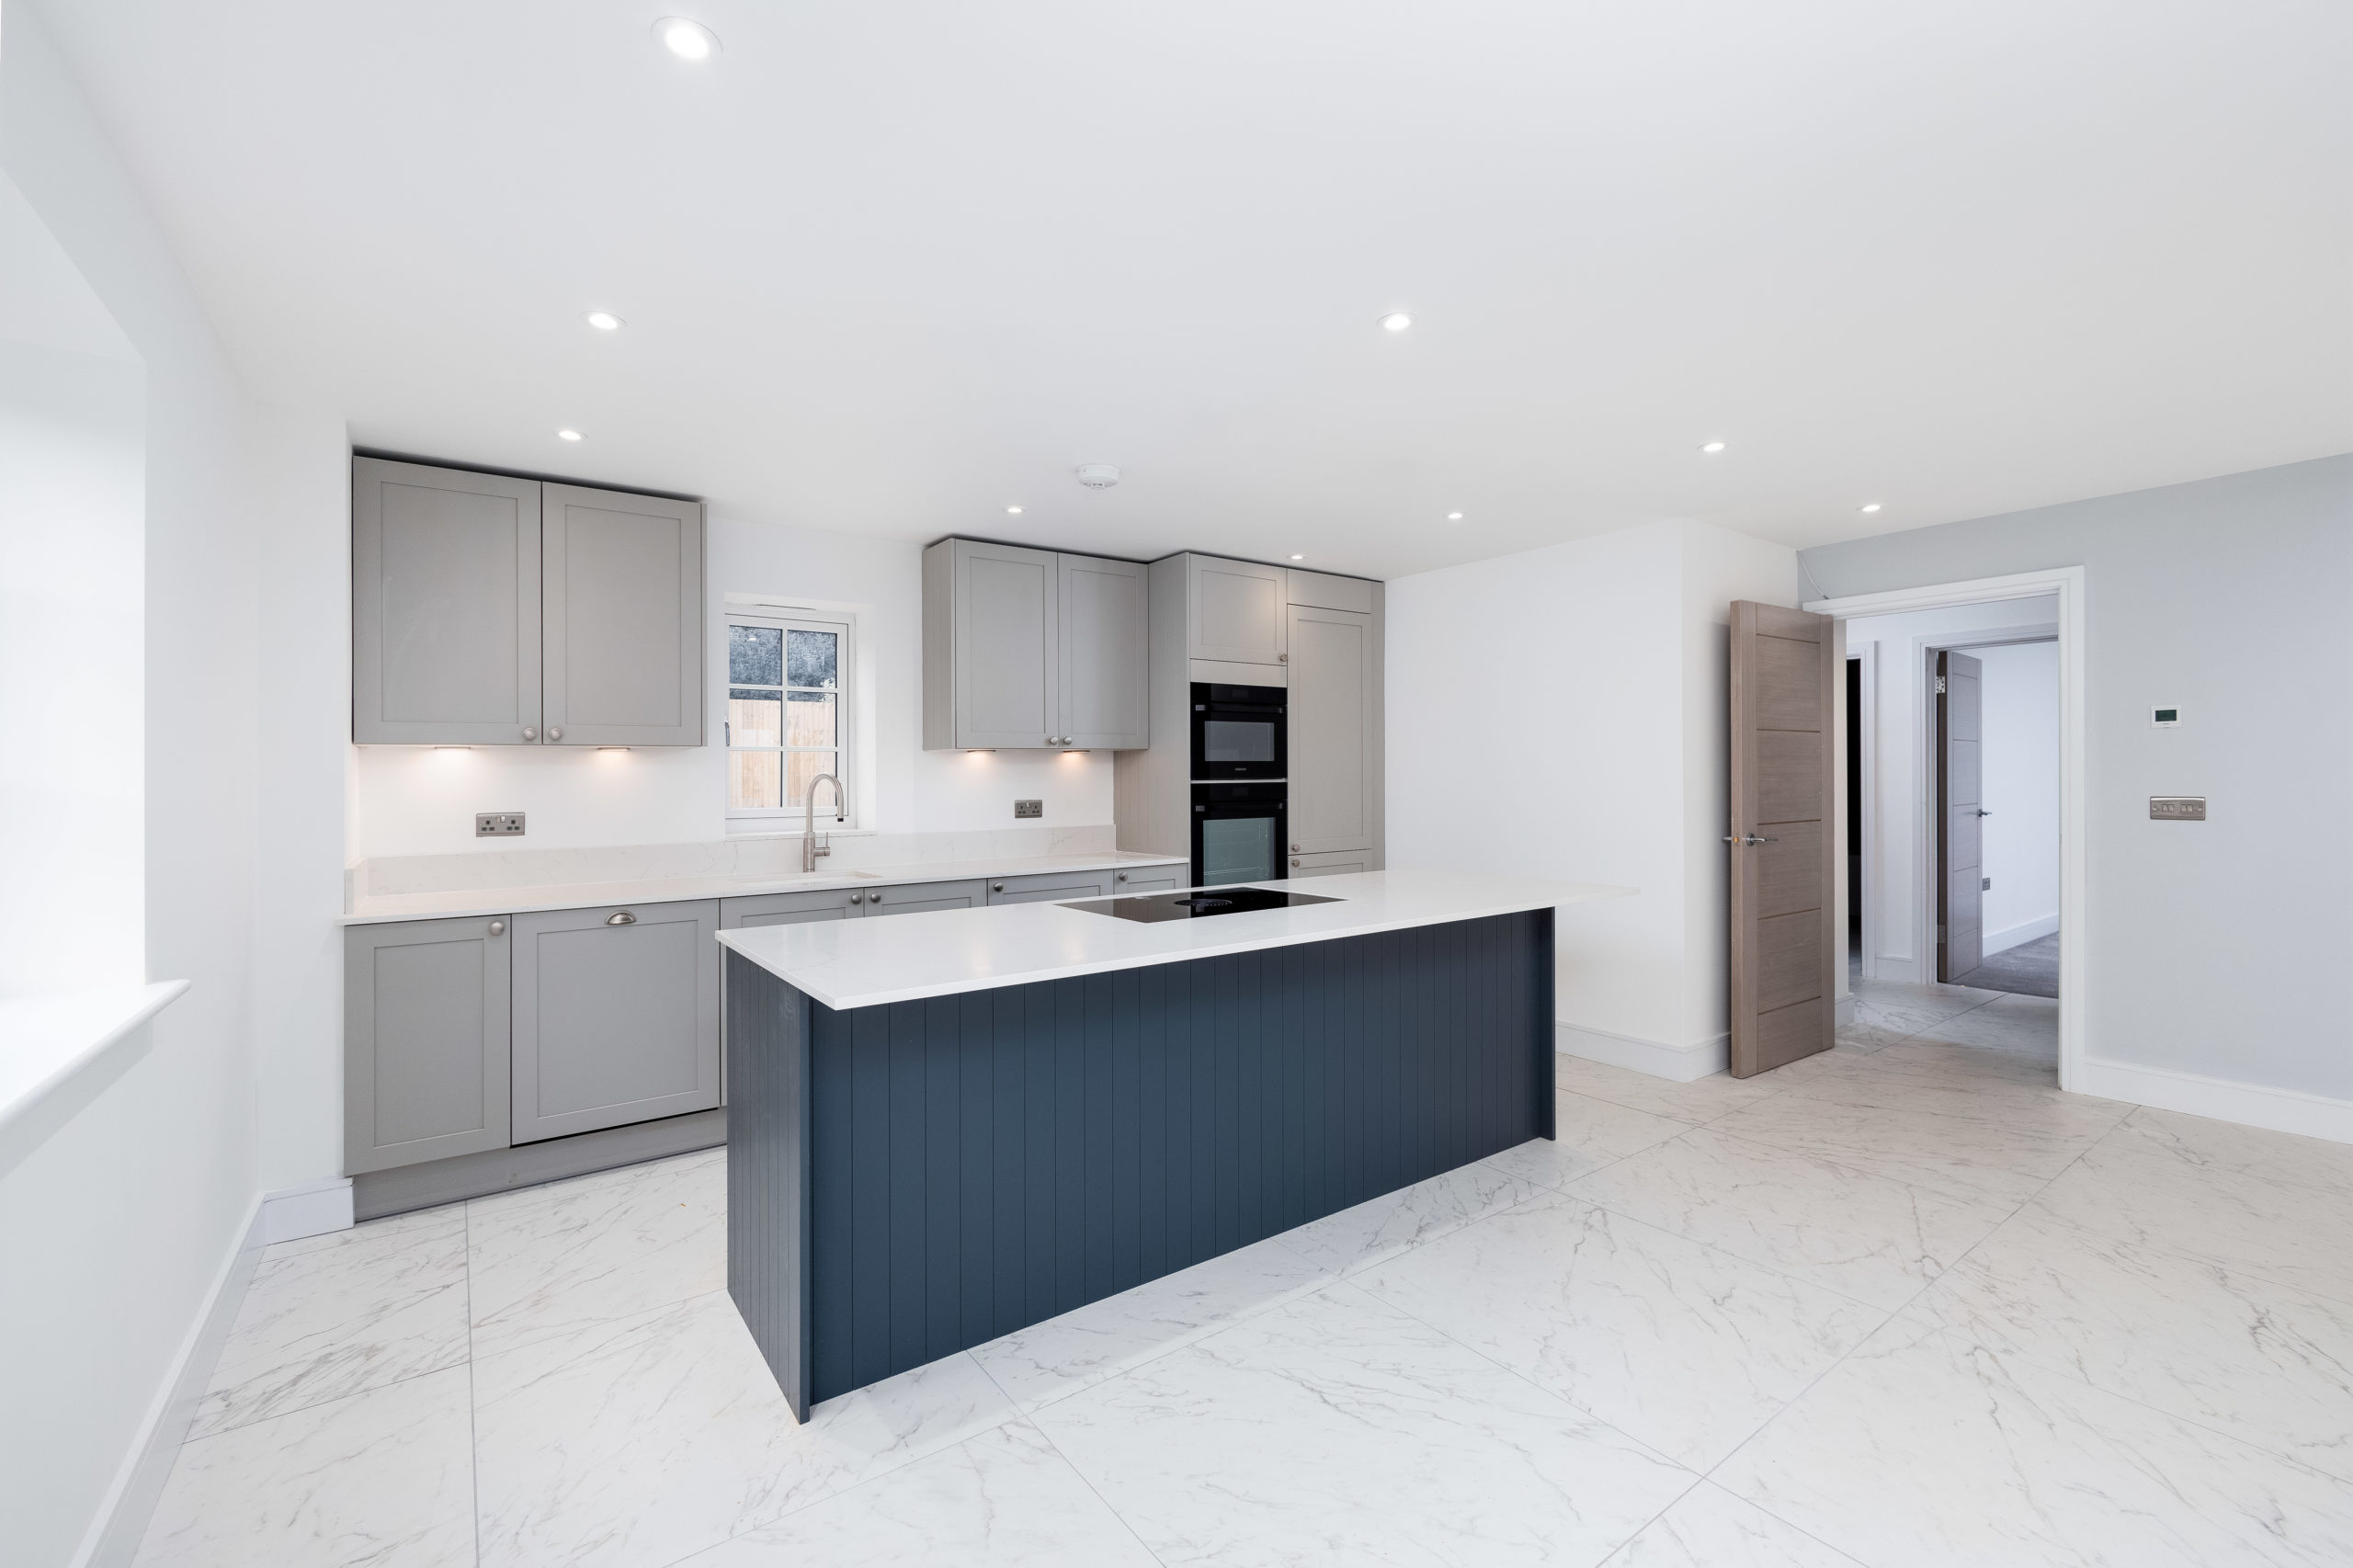 404 Goffs Lane | New Build home finished and sold